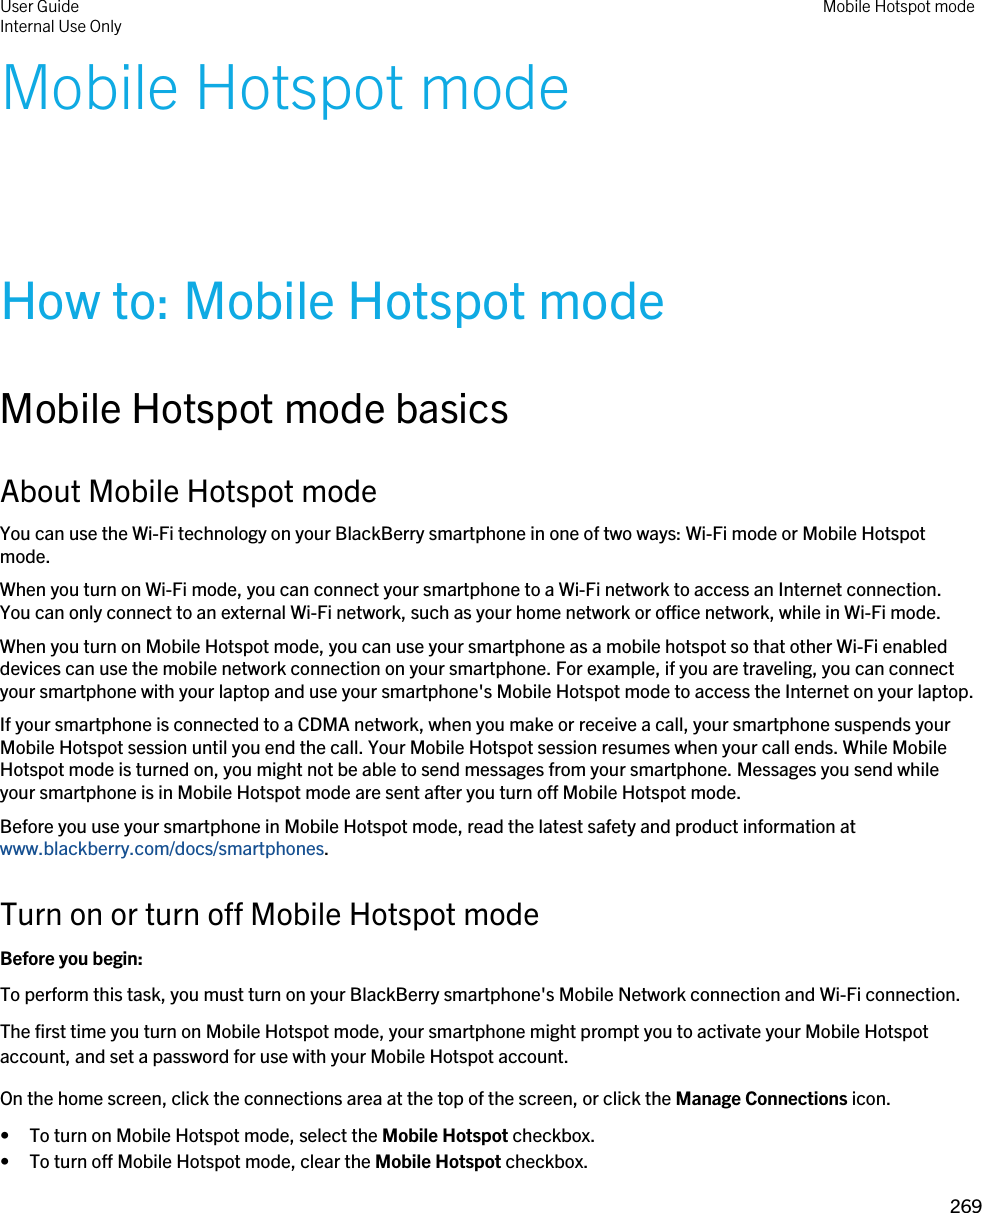 Mobile Hotspot modeHow to: Mobile Hotspot modeMobile Hotspot mode basicsAbout Mobile Hotspot modeYou can use the Wi-Fi technology on your BlackBerry smartphone in one of two ways: Wi-Fi mode or Mobile Hotspot mode.When you turn on Wi-Fi mode, you can connect your smartphone to a Wi-Fi network to access an Internet connection. You can only connect to an external Wi-Fi network, such as your home network or office network, while in Wi-Fi mode.When you turn on Mobile Hotspot mode, you can use your smartphone as a mobile hotspot so that other Wi-Fi enabled devices can use the mobile network connection on your smartphone. For example, if you are traveling, you can connect your smartphone with your laptop and use your smartphone&apos;s Mobile Hotspot mode to access the Internet on your laptop.If your smartphone is connected to a CDMA network, when you make or receive a call, your smartphone suspends your Mobile Hotspot session until you end the call. Your Mobile Hotspot session resumes when your call ends. While Mobile Hotspot mode is turned on, you might not be able to send messages from your smartphone. Messages you send while your smartphone is in Mobile Hotspot mode are sent after you turn off Mobile Hotspot mode.Before you use your smartphone in Mobile Hotspot mode, read the latest safety and product information at www.blackberry.com/docs/smartphones.Turn on or turn off Mobile Hotspot modeBefore you begin: To perform this task, you must turn on your BlackBerry smartphone&apos;s Mobile Network connection and Wi-Fi connection.The first time you turn on Mobile Hotspot mode, your smartphone might prompt you to activate your Mobile Hotspot account, and set a password for use with your Mobile Hotspot account.On the home screen, click the connections area at the top of the screen, or click the Manage Connections icon.• To turn on Mobile Hotspot mode, select the Mobile Hotspot checkbox.• To turn off Mobile Hotspot mode, clear the Mobile Hotspot checkbox.User GuideInternal Use Only Mobile Hotspot mode269 